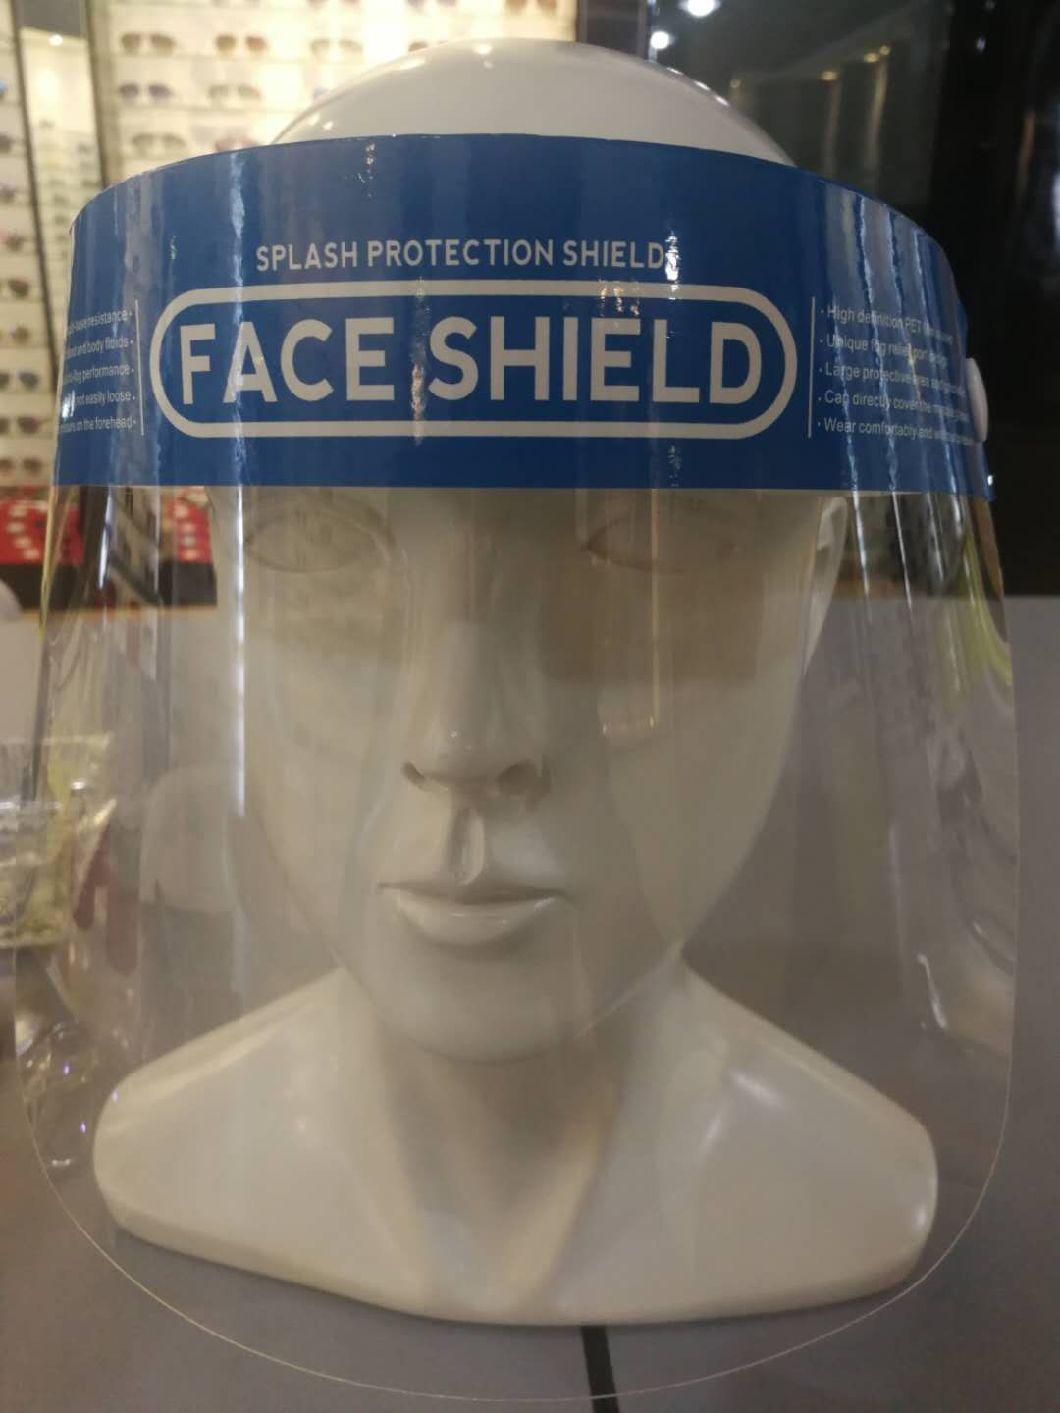 Splash Protection Shield Face Shield Protective Shield Face Cover All Cover